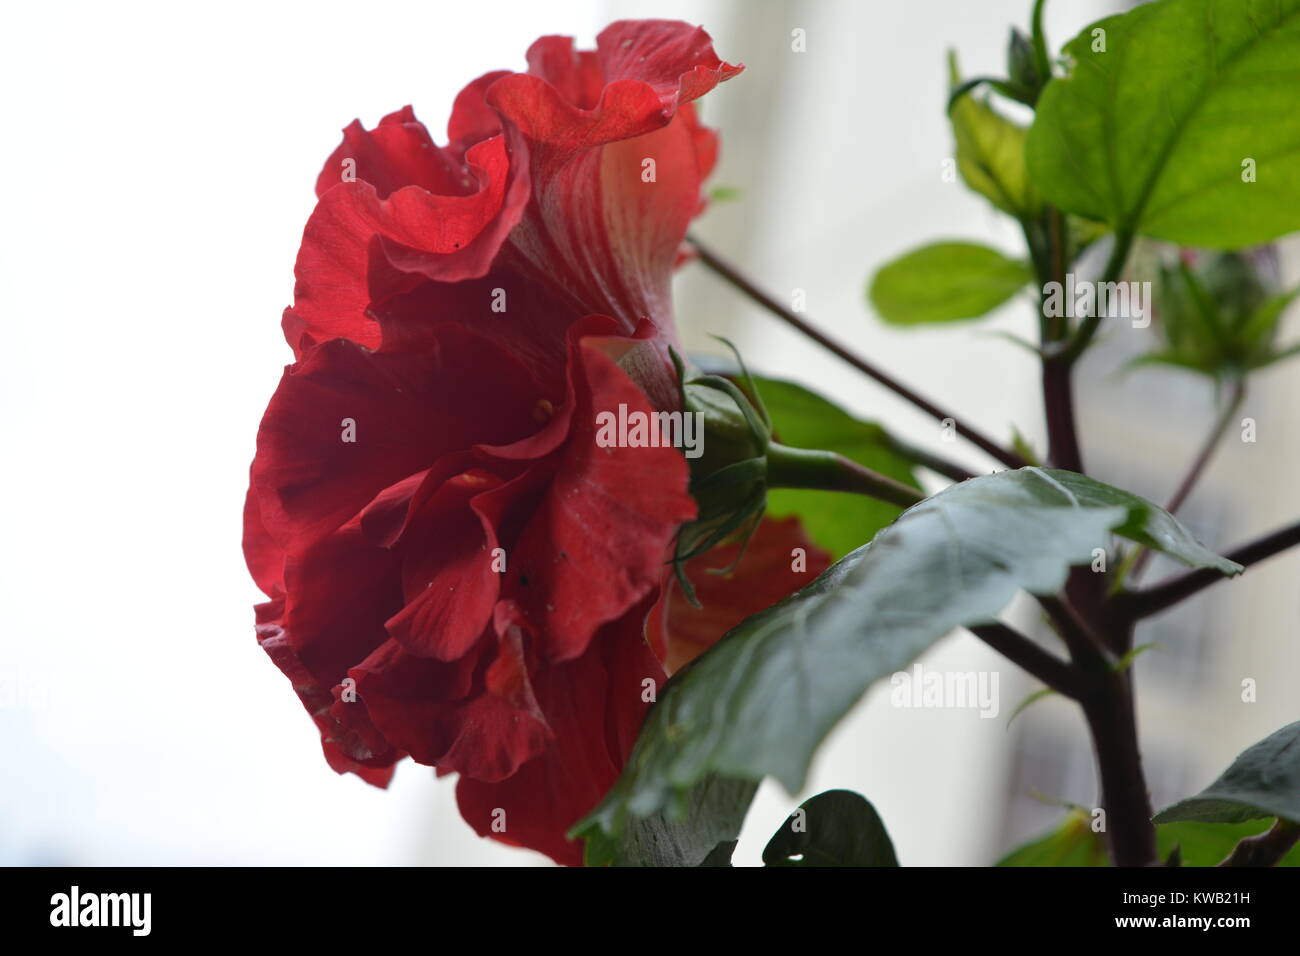 A beautiful rose from a side angle with a white sky background Stock Photo